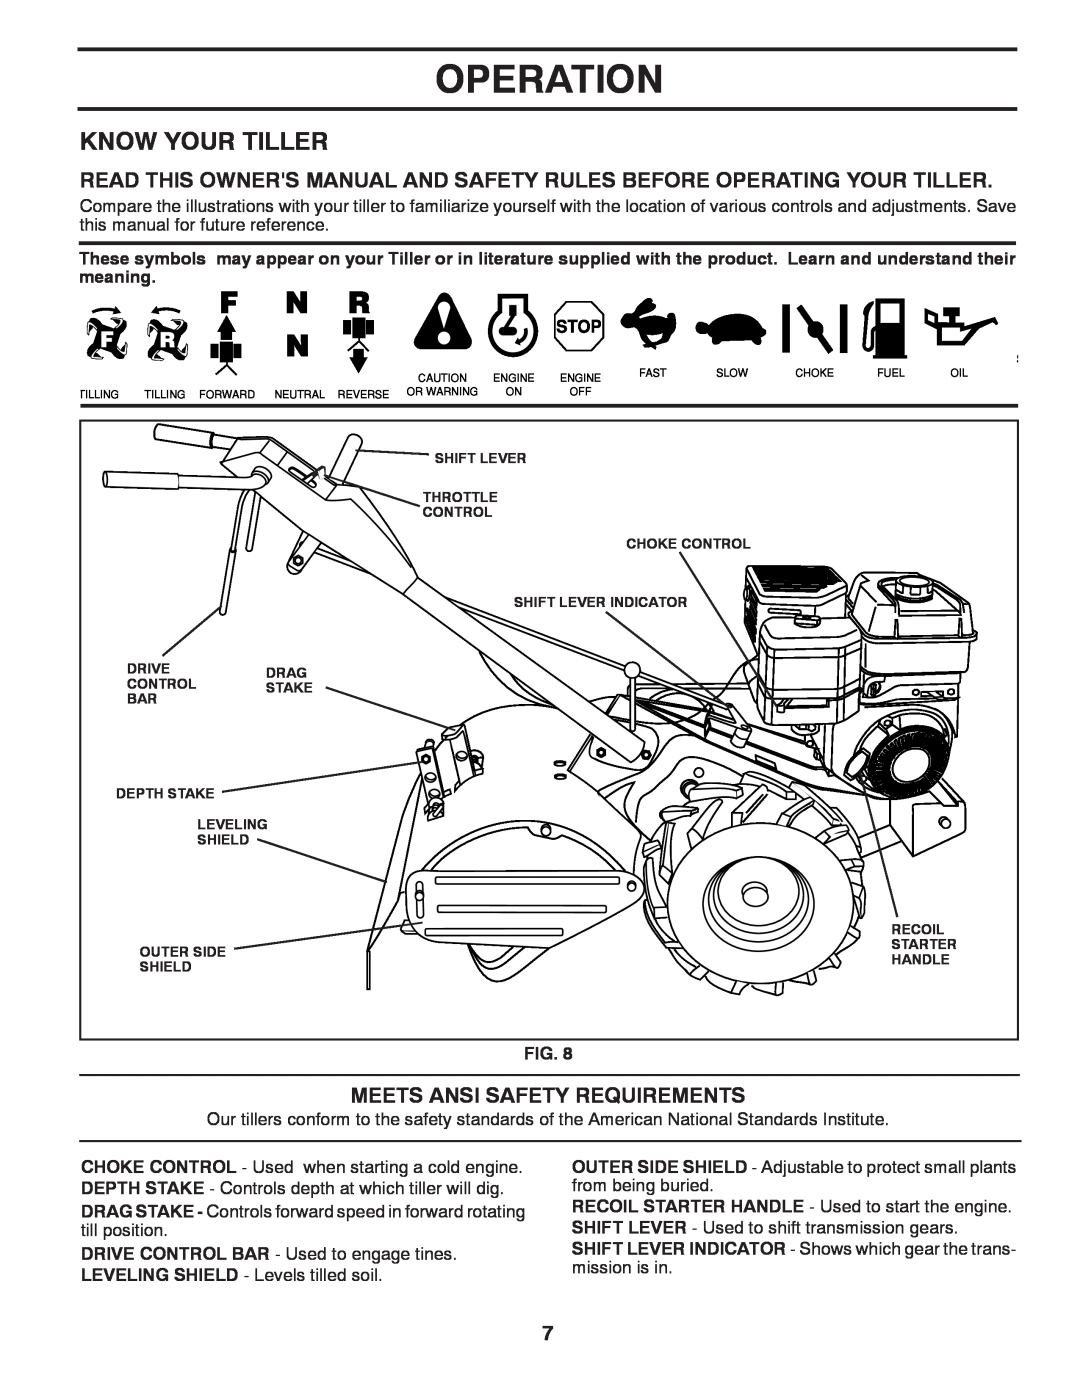 Husqvarna DRT70 owner manual Operation, Know Your Tiller, Meets Ansi Safety Requirements 